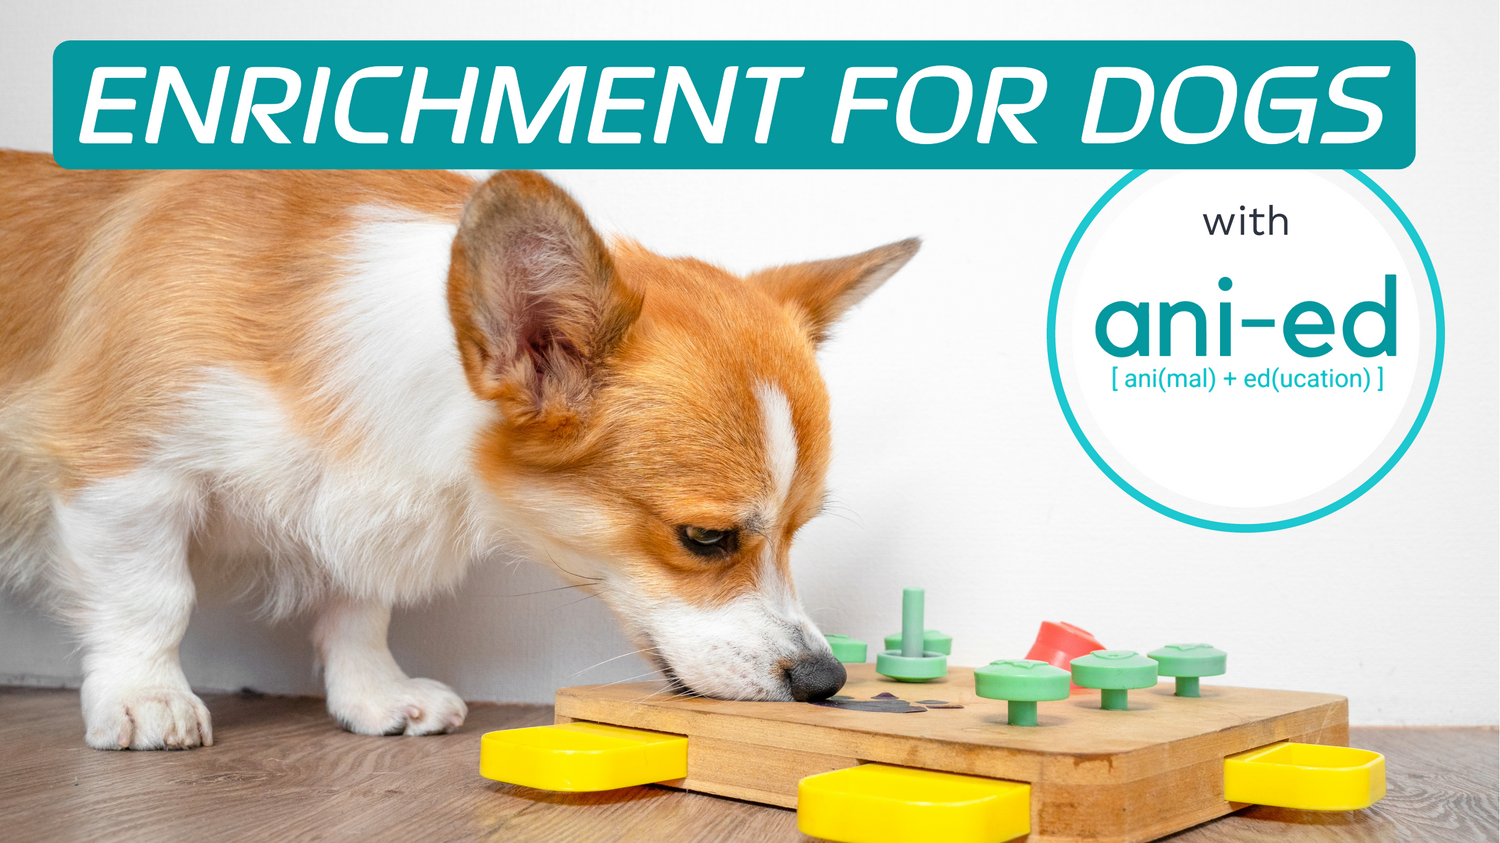 A dog eating treats out of a enrichment puzzle for dogs and a box with text “Enrichment for dogs”